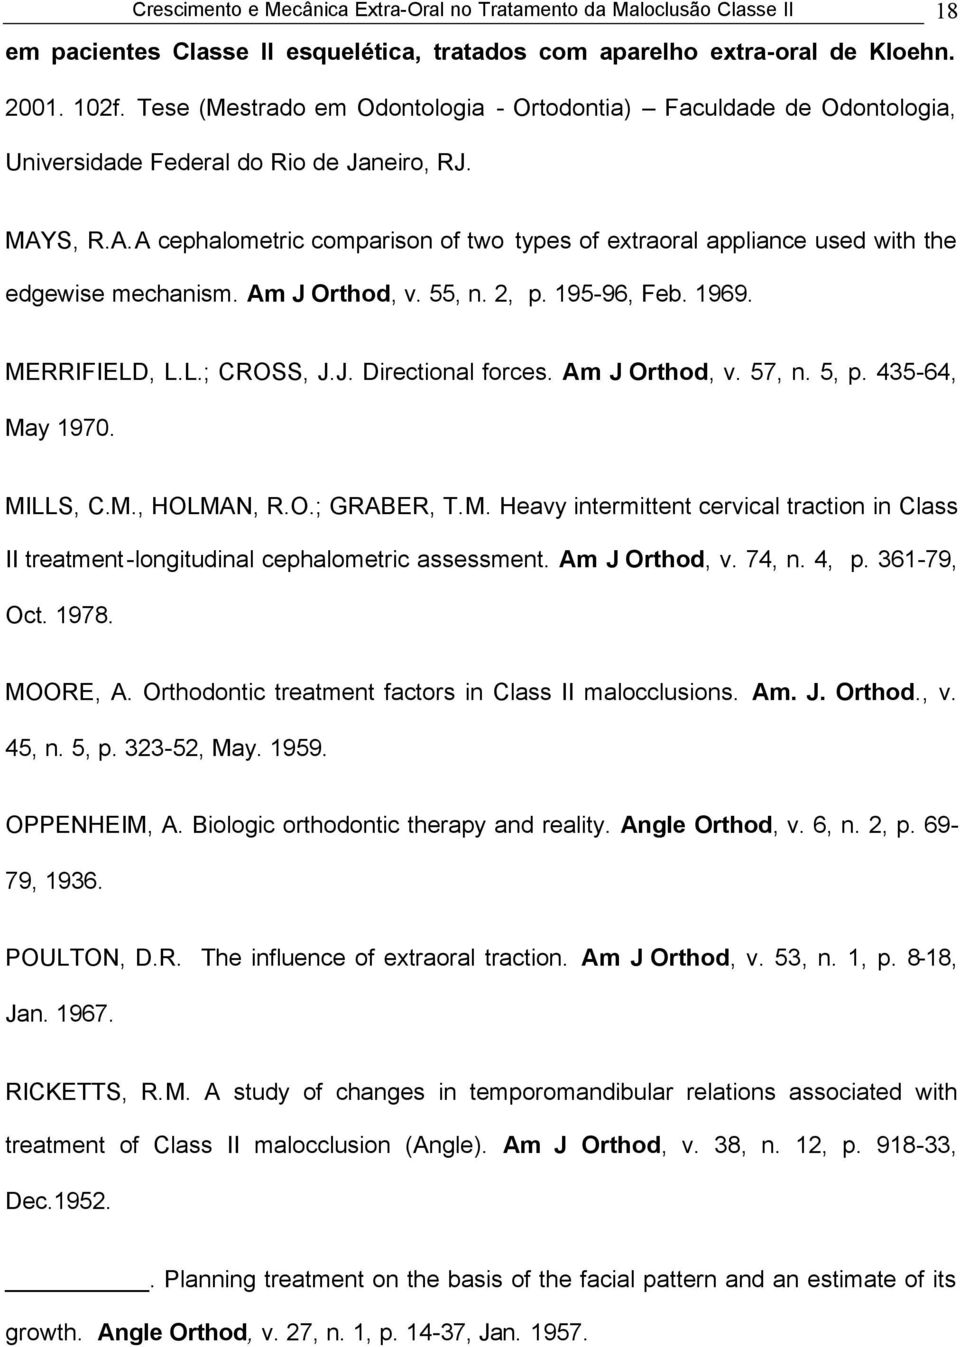 S, R.A.A cephalometric comparison of two types of extraoral appliance used with the edgewise mechanism. Am J Orthod, v. 55, n. 2, p. 195-96, Feb. 1969. MERRIFIELD, L.L.; CROSS, J.J. Directional forces.